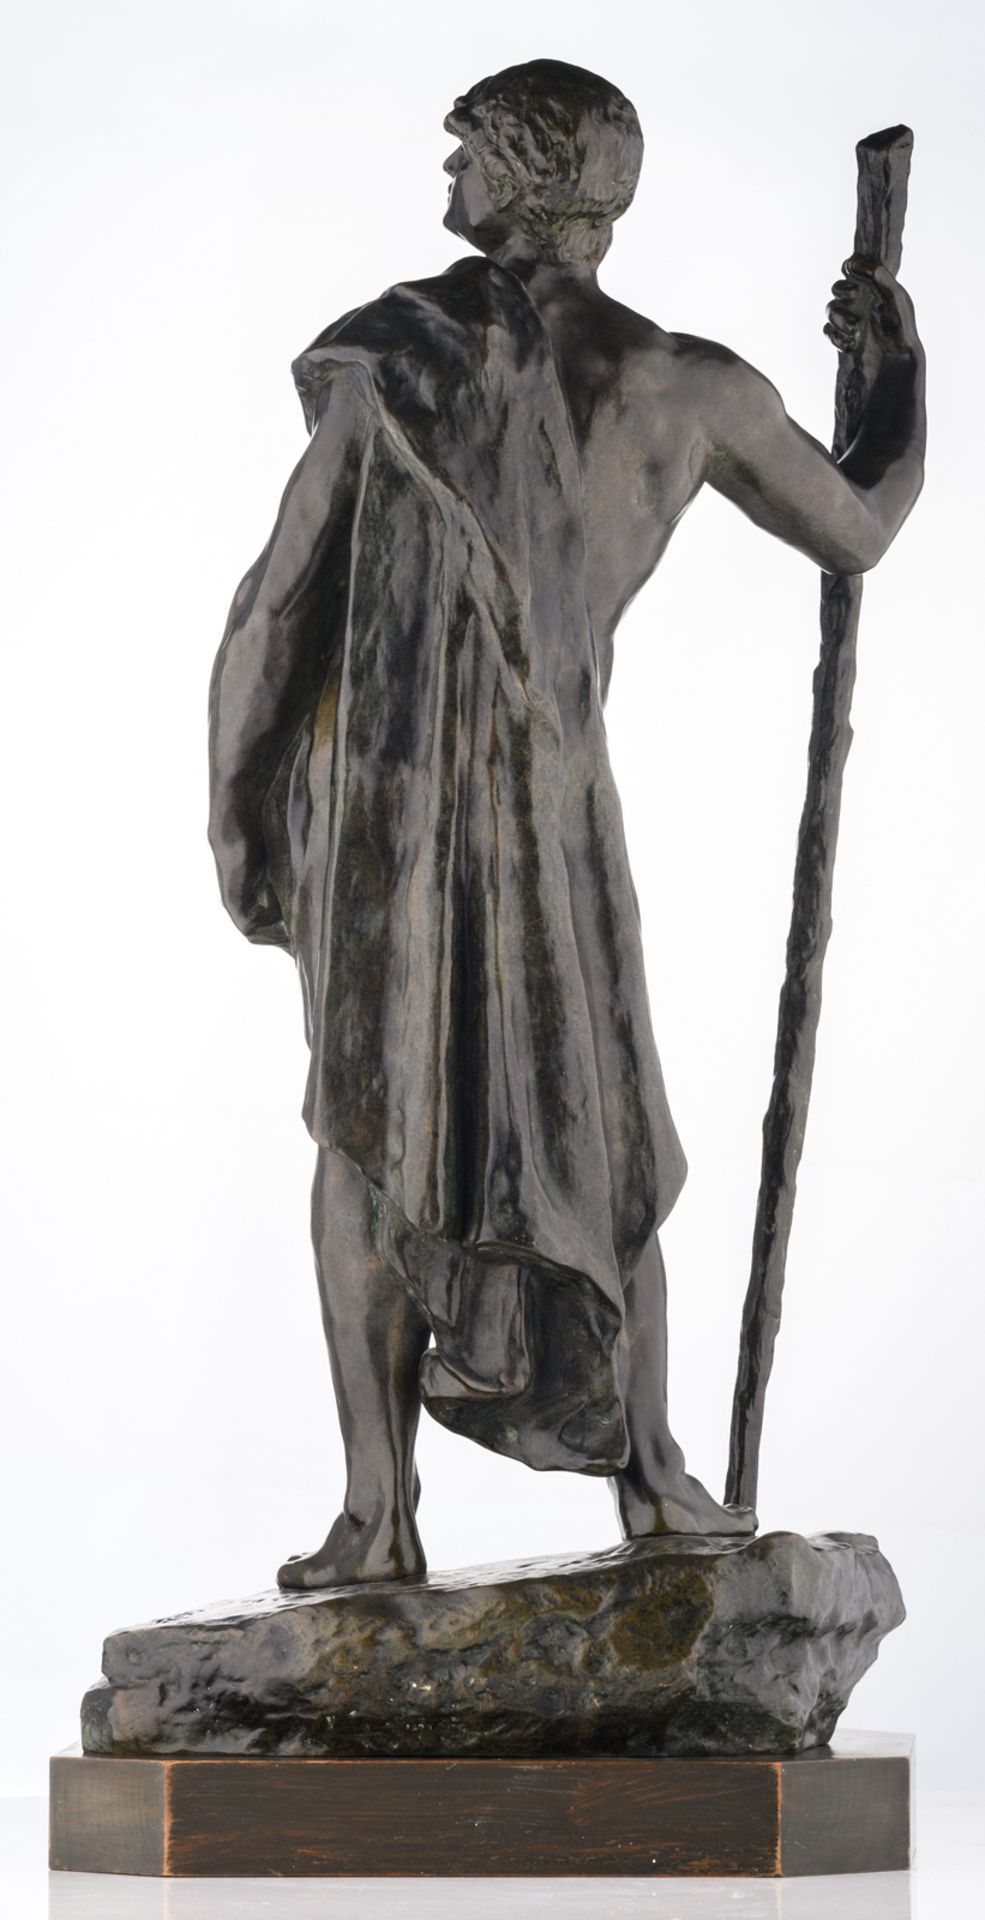 Colin G., 'Le chemin parcouru', patinated bronze, on a wooden base with dedication to Emile - Bild 4 aus 9